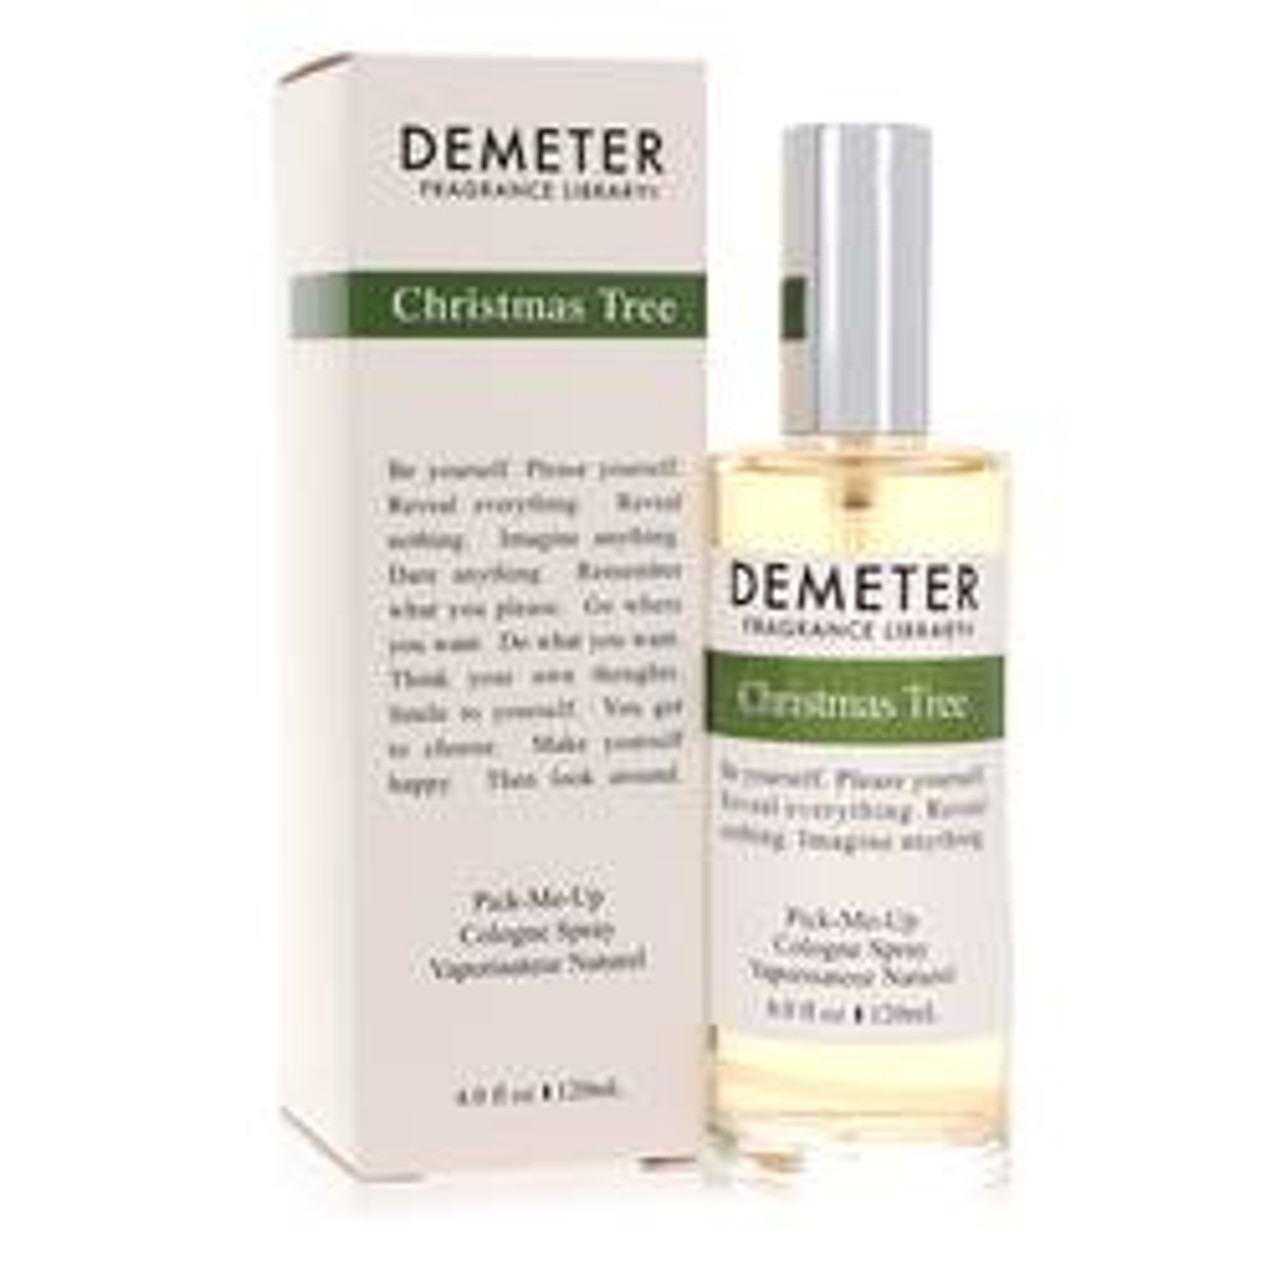 Demeter Christmas Tree Perfume By Demeter Cologne Spray 4 oz for Women - [From 79.50 - Choose pk Qty ] - *Ships from Miami